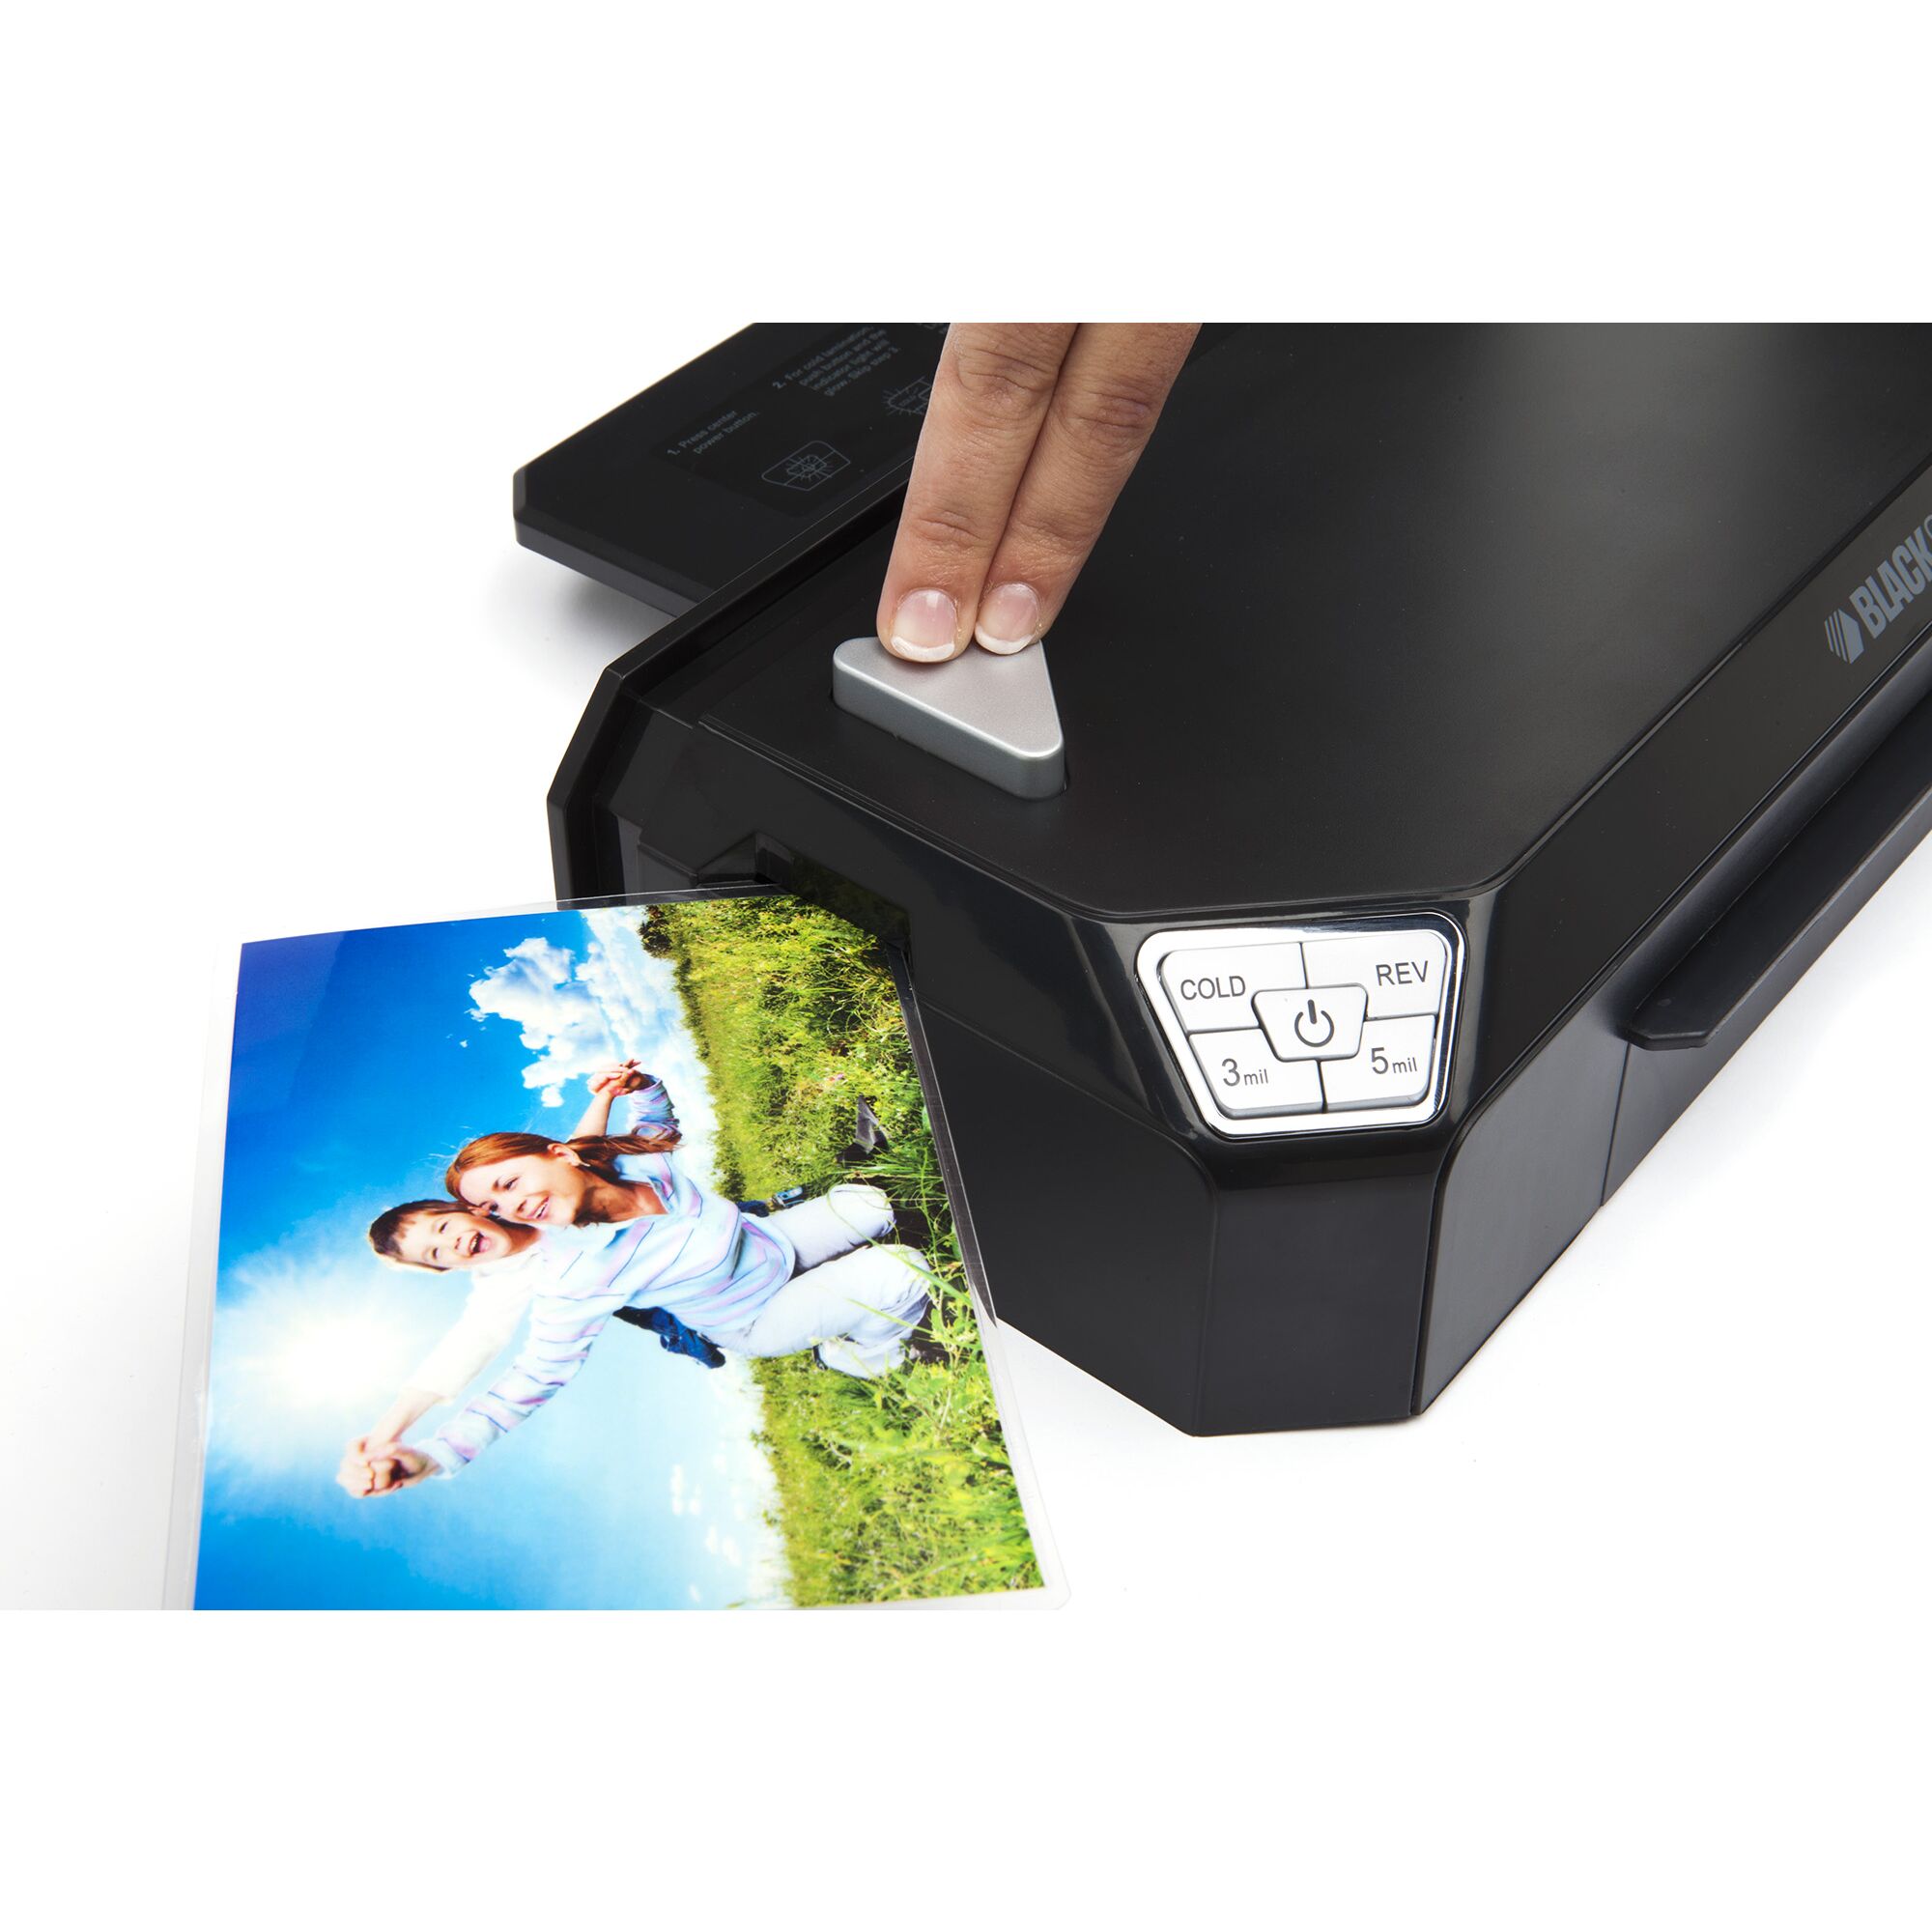 Flash Pro 9.5 inch thermal laminator being used by a person to laminate a photograph.